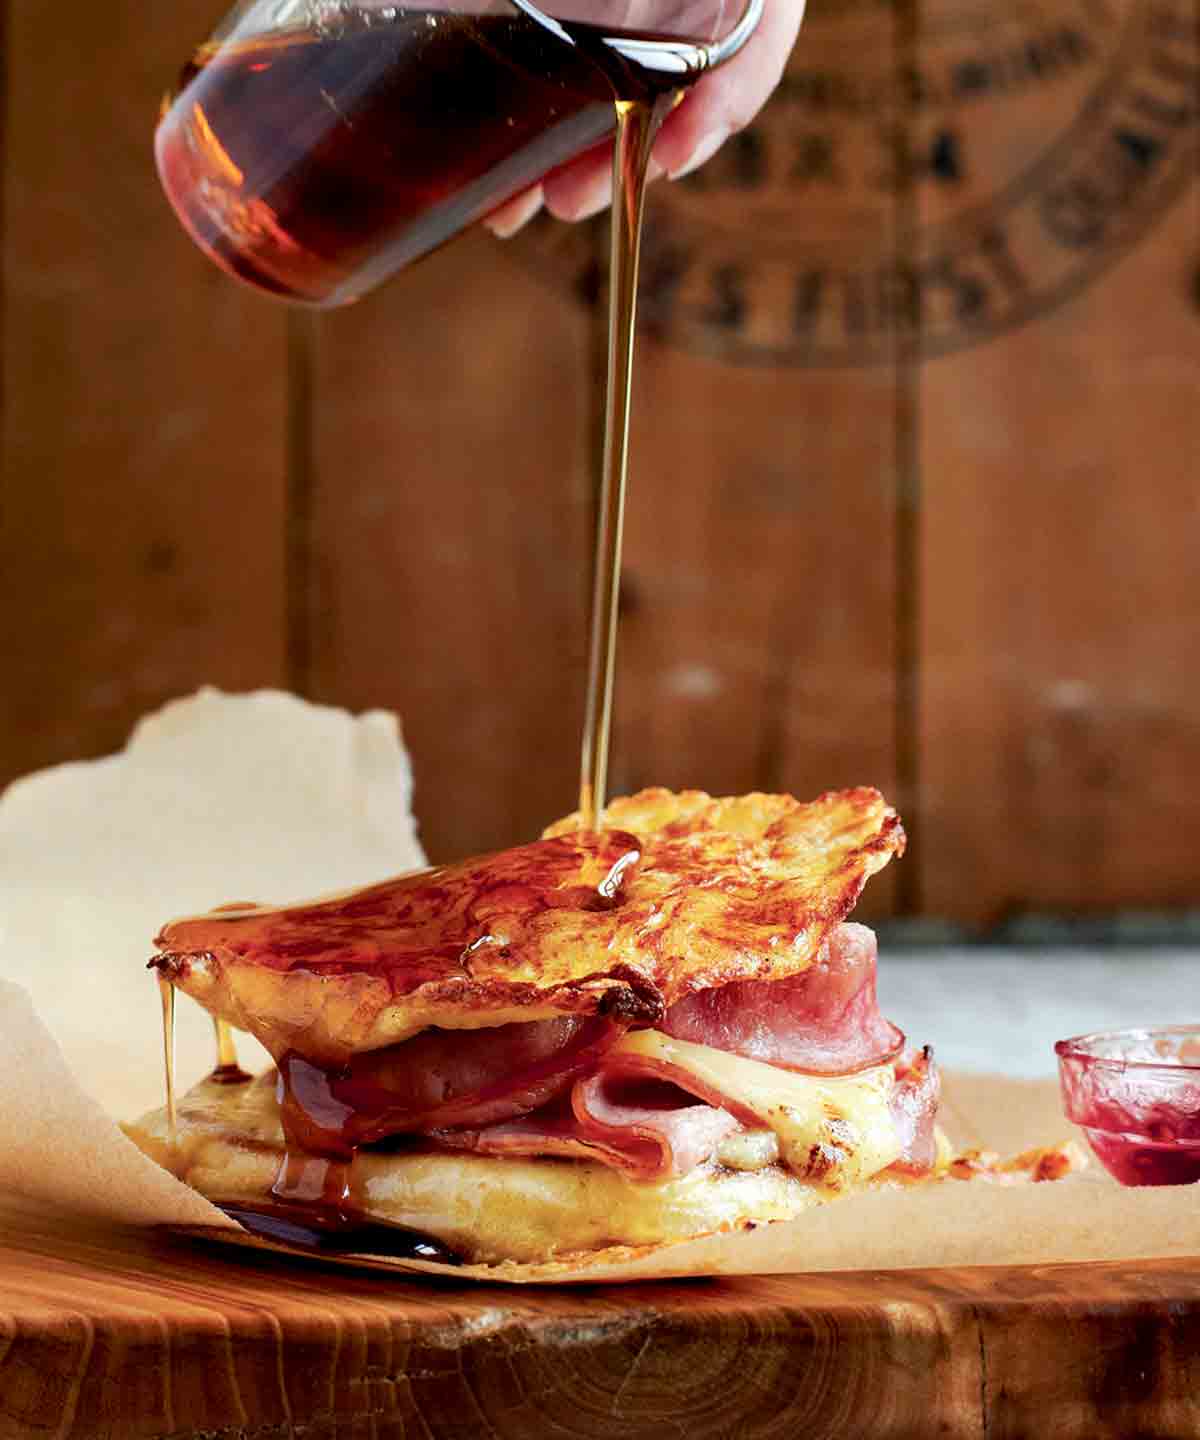 Maple syrup being poured over a monte cristo sandwich that is on a piece of parchment paper.